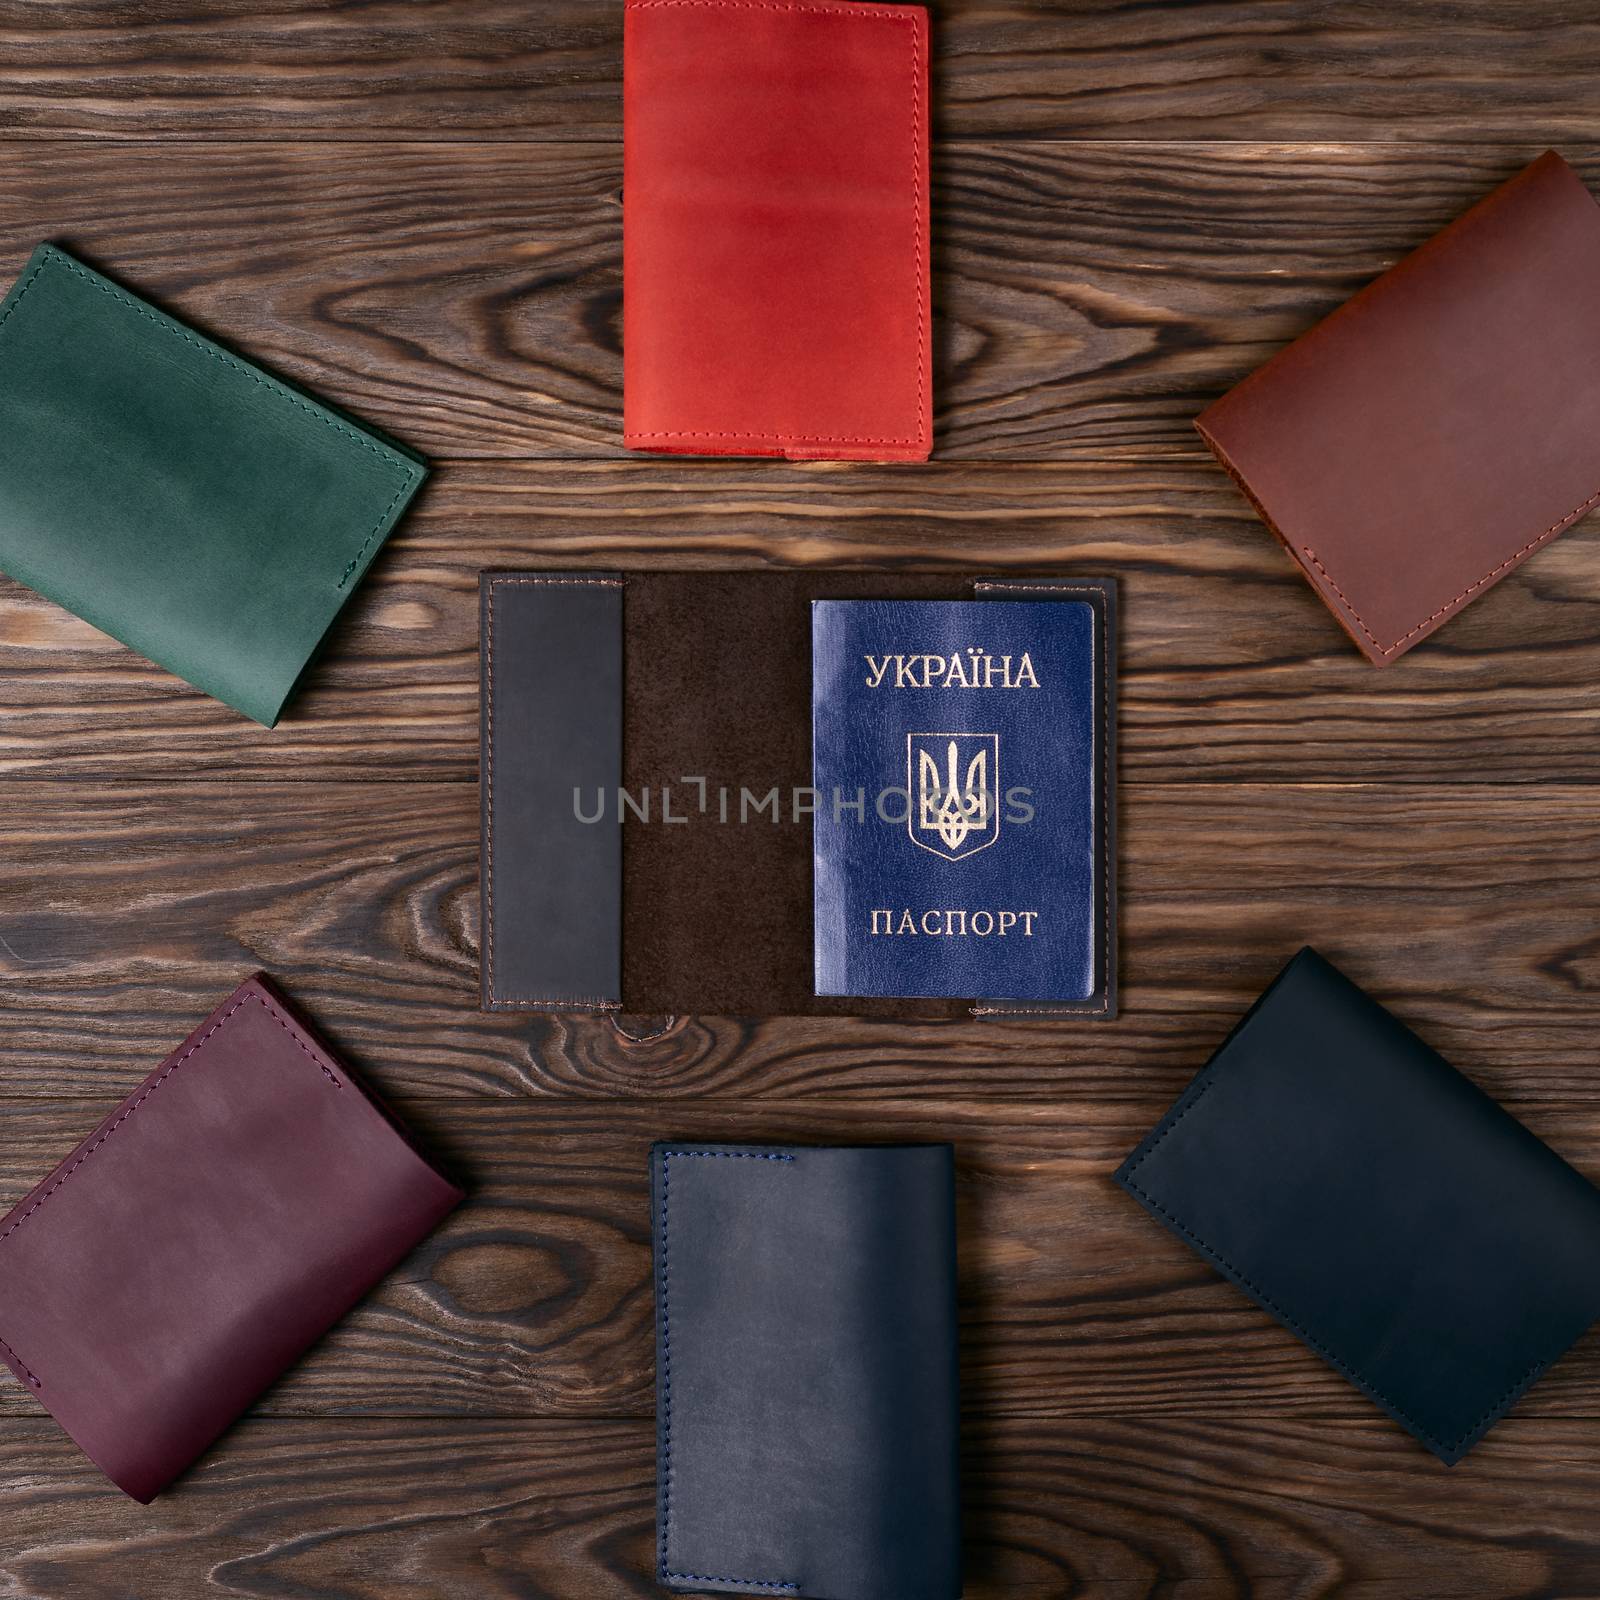 Six handmade leather passport covers around one opened cover on wooden textured background. Up to down view. Stock photo of luxury accessories. by alexsdriver